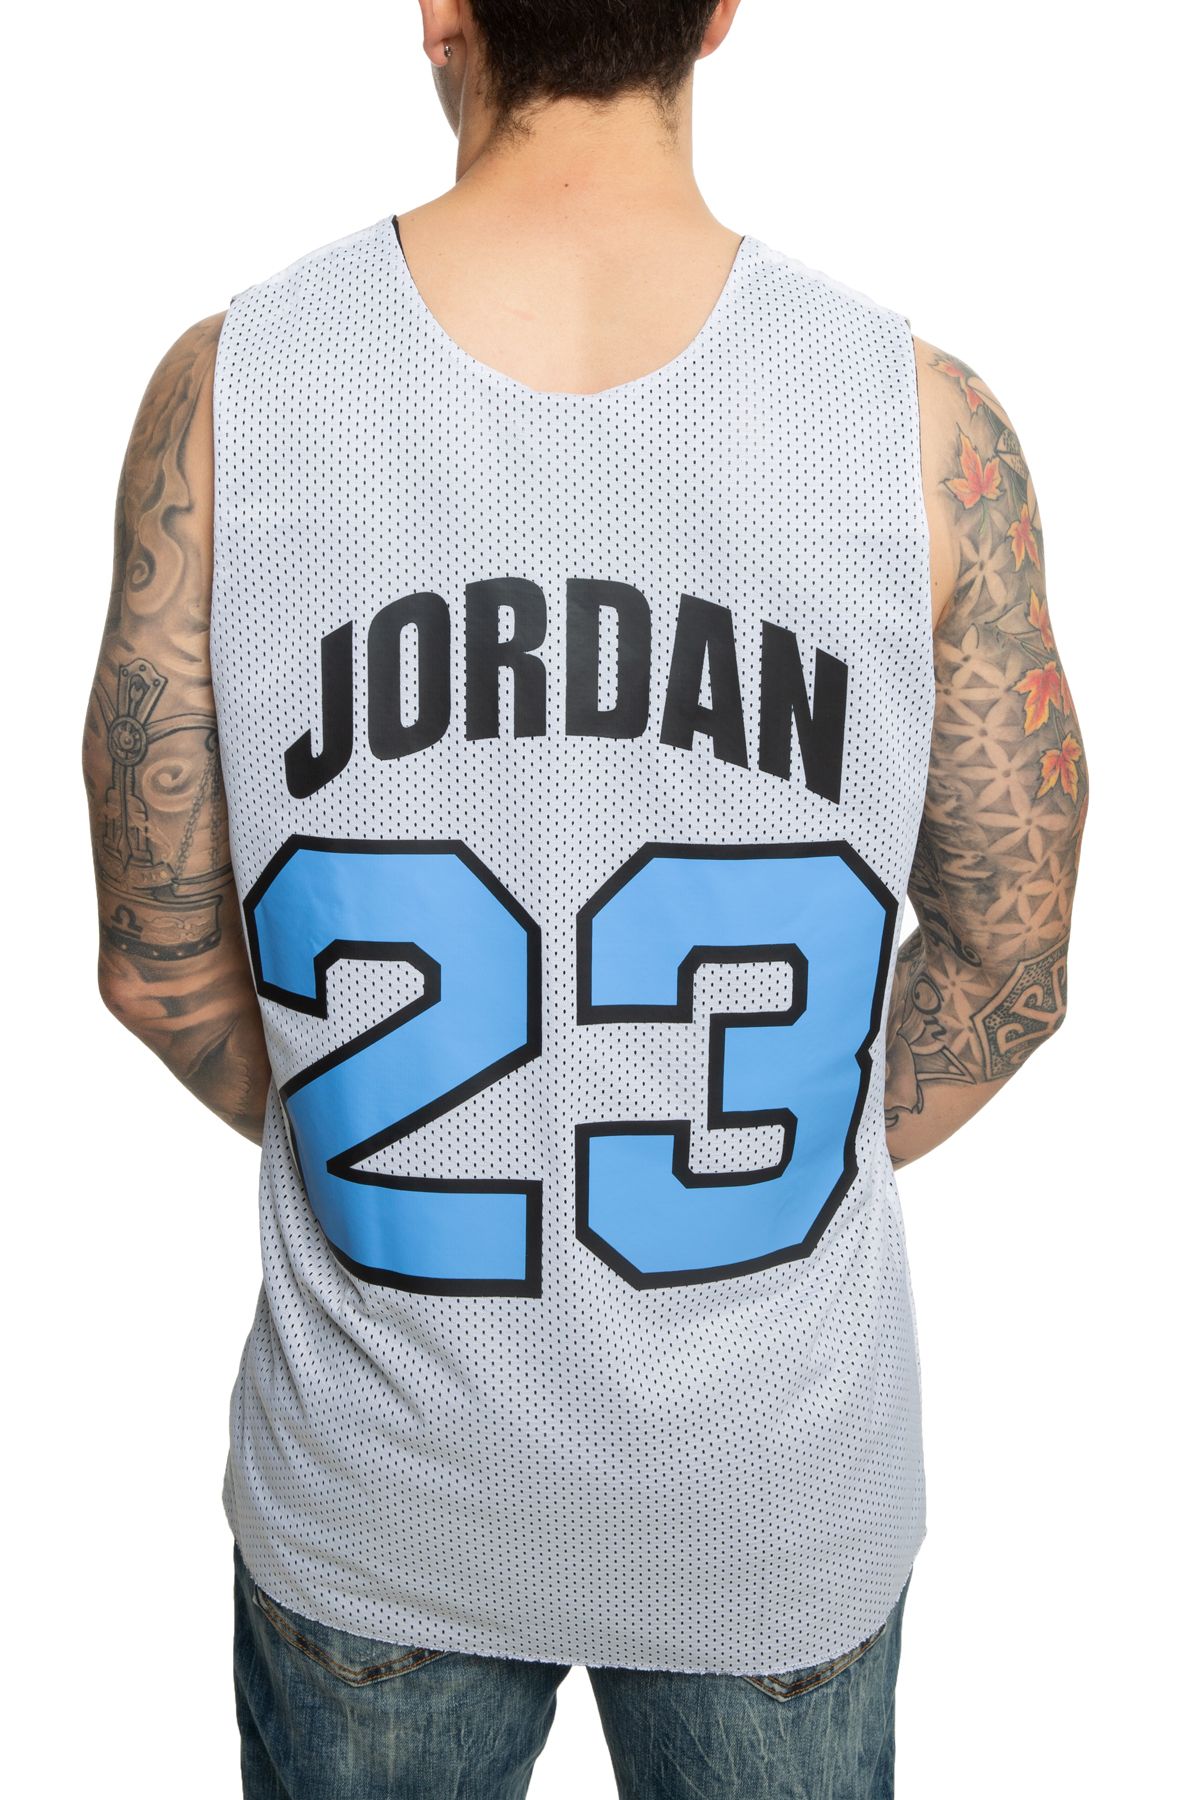 Authentic Reversible Practice Jersey All-Star 1997 Michael Jordan - Shop  Mitchell & Ness Authentic Jerseys and Replicas Mitchell & Ness Nostalgia Co.